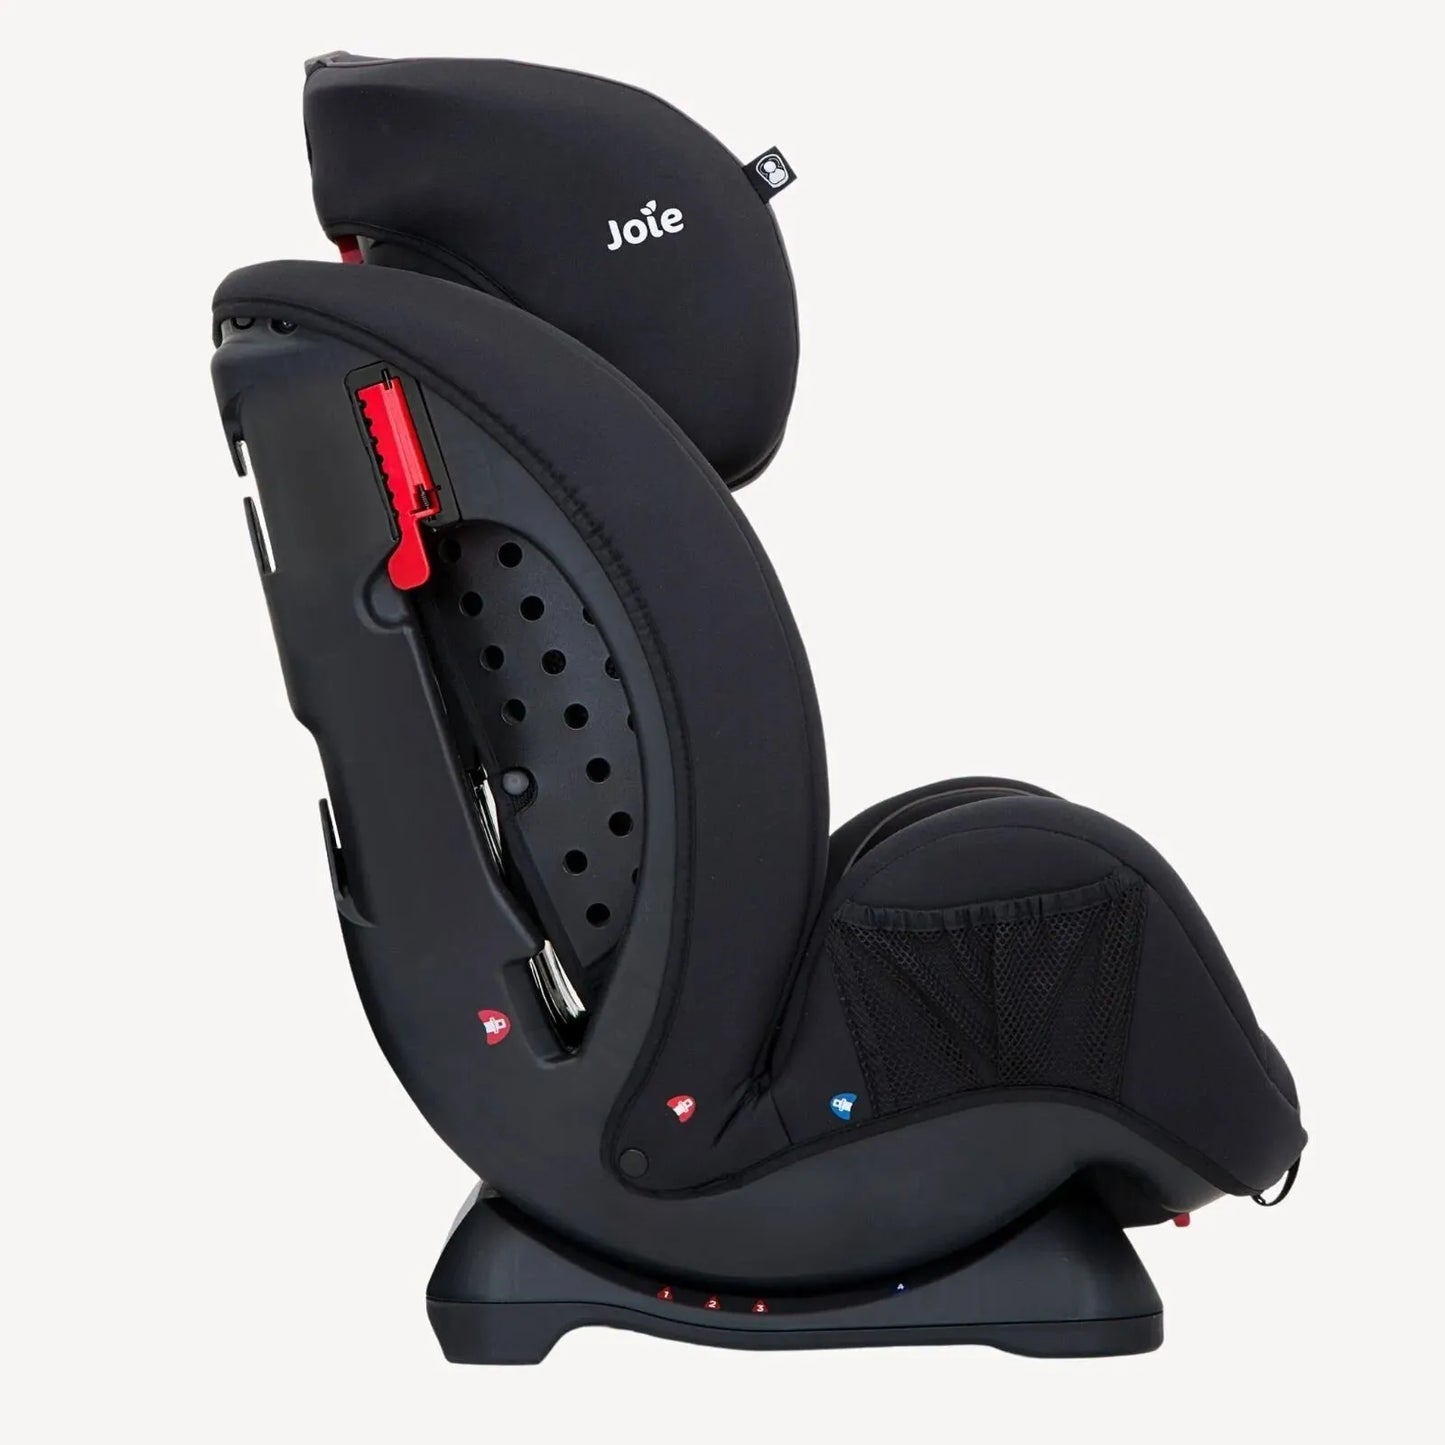 Joie Stages Group 0-1-2 Car Seat